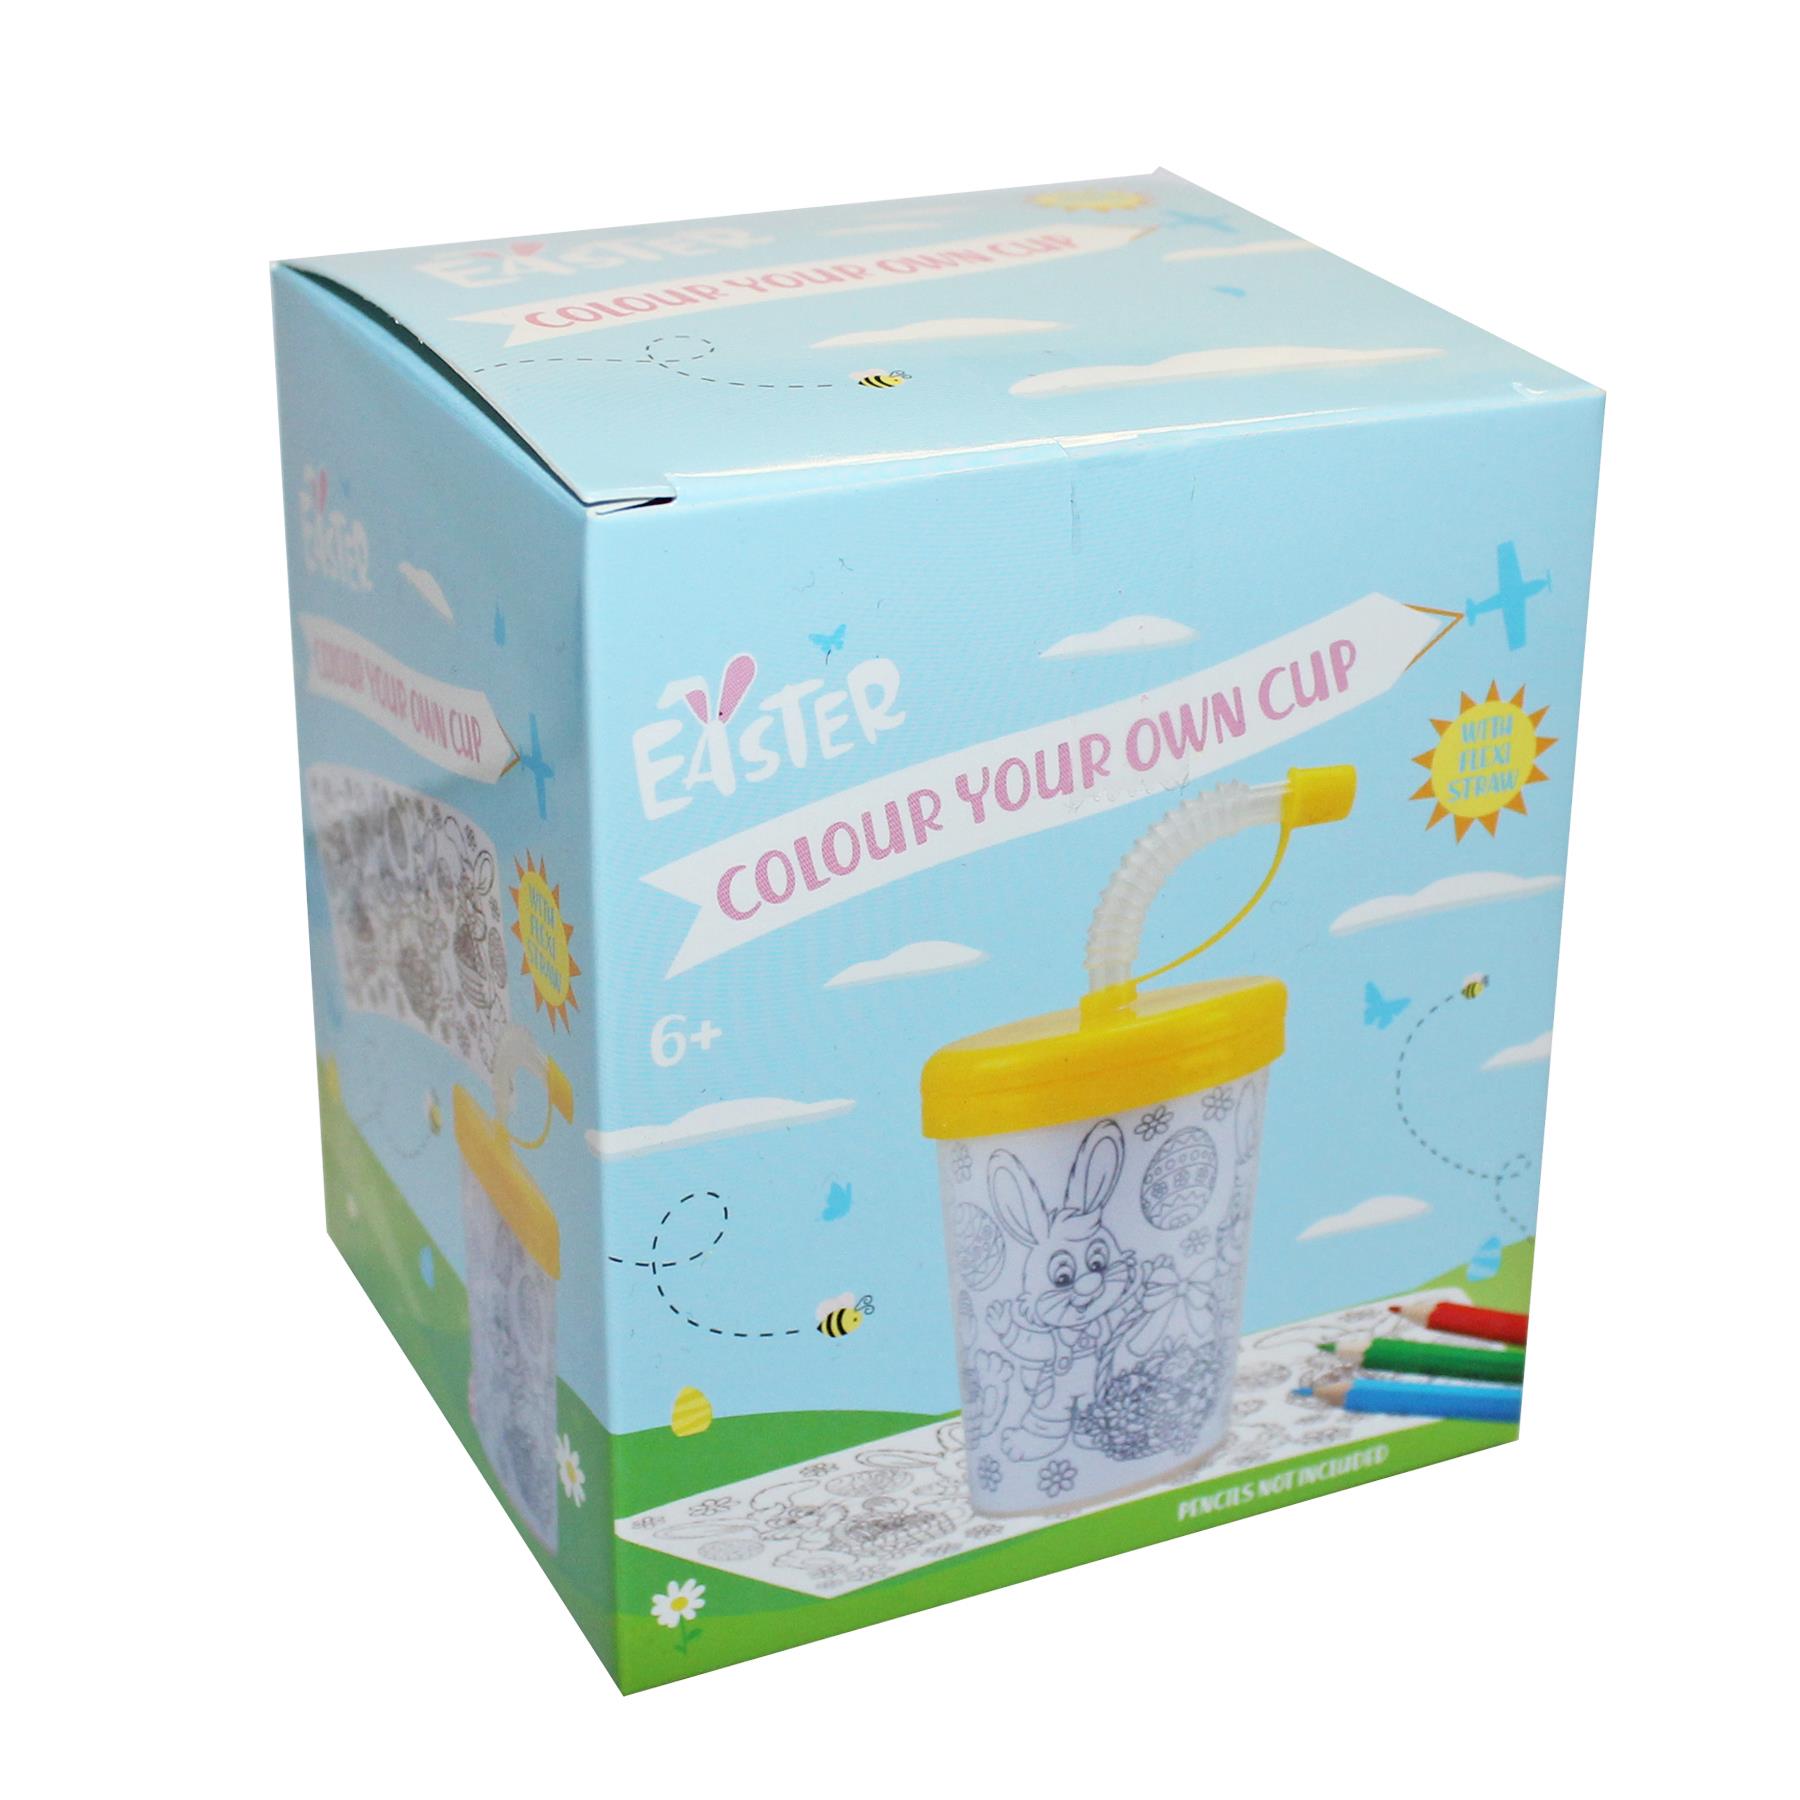 Easter Arts and Crafts Children Activities - Colour your own Cup with Straw Age 6+